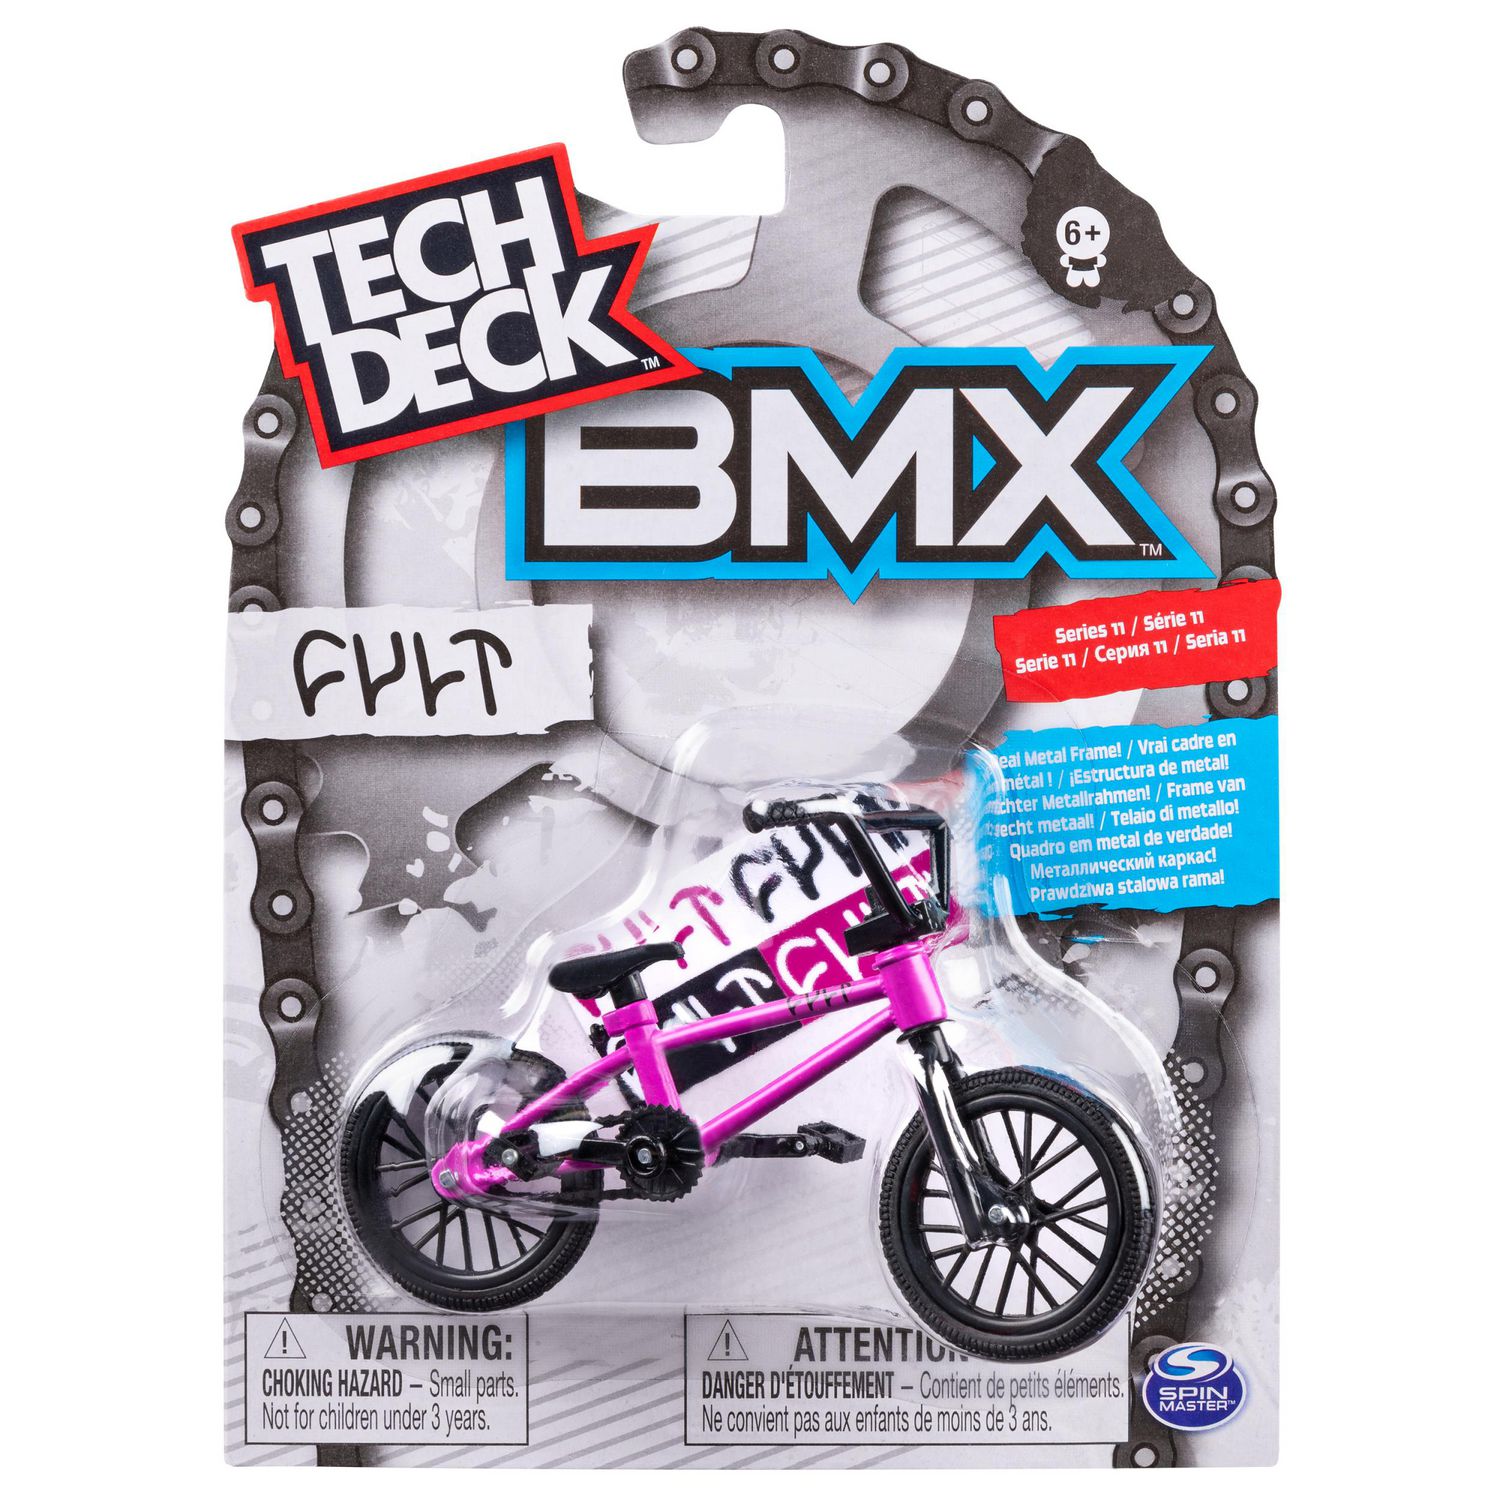 Series 11 WeThePeople TECH DECK BMX Finger Bike with Real Metal Frame 